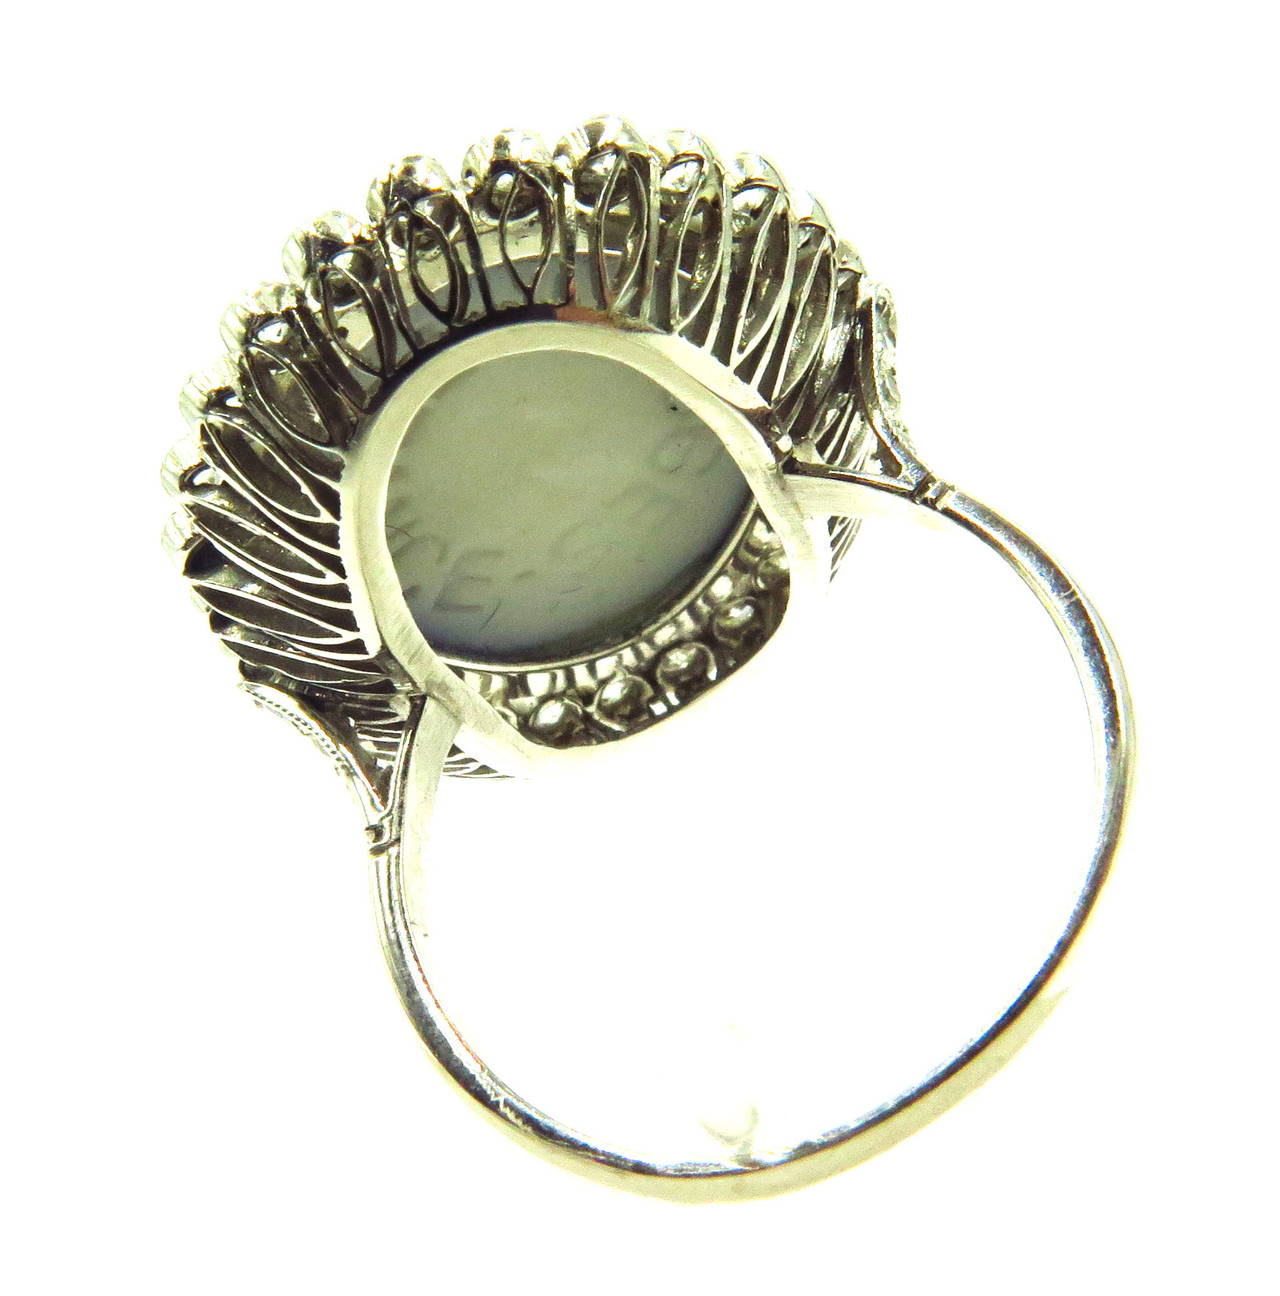 This platinum ring has 27 bezel set diamonds surrounding the Limoges and 3 diamonds on each side of the rings shank. The underside of this ring is signed Limoges - France. The ring shank is marked PLAT
This ring is a size 7 1/4 and can easily be